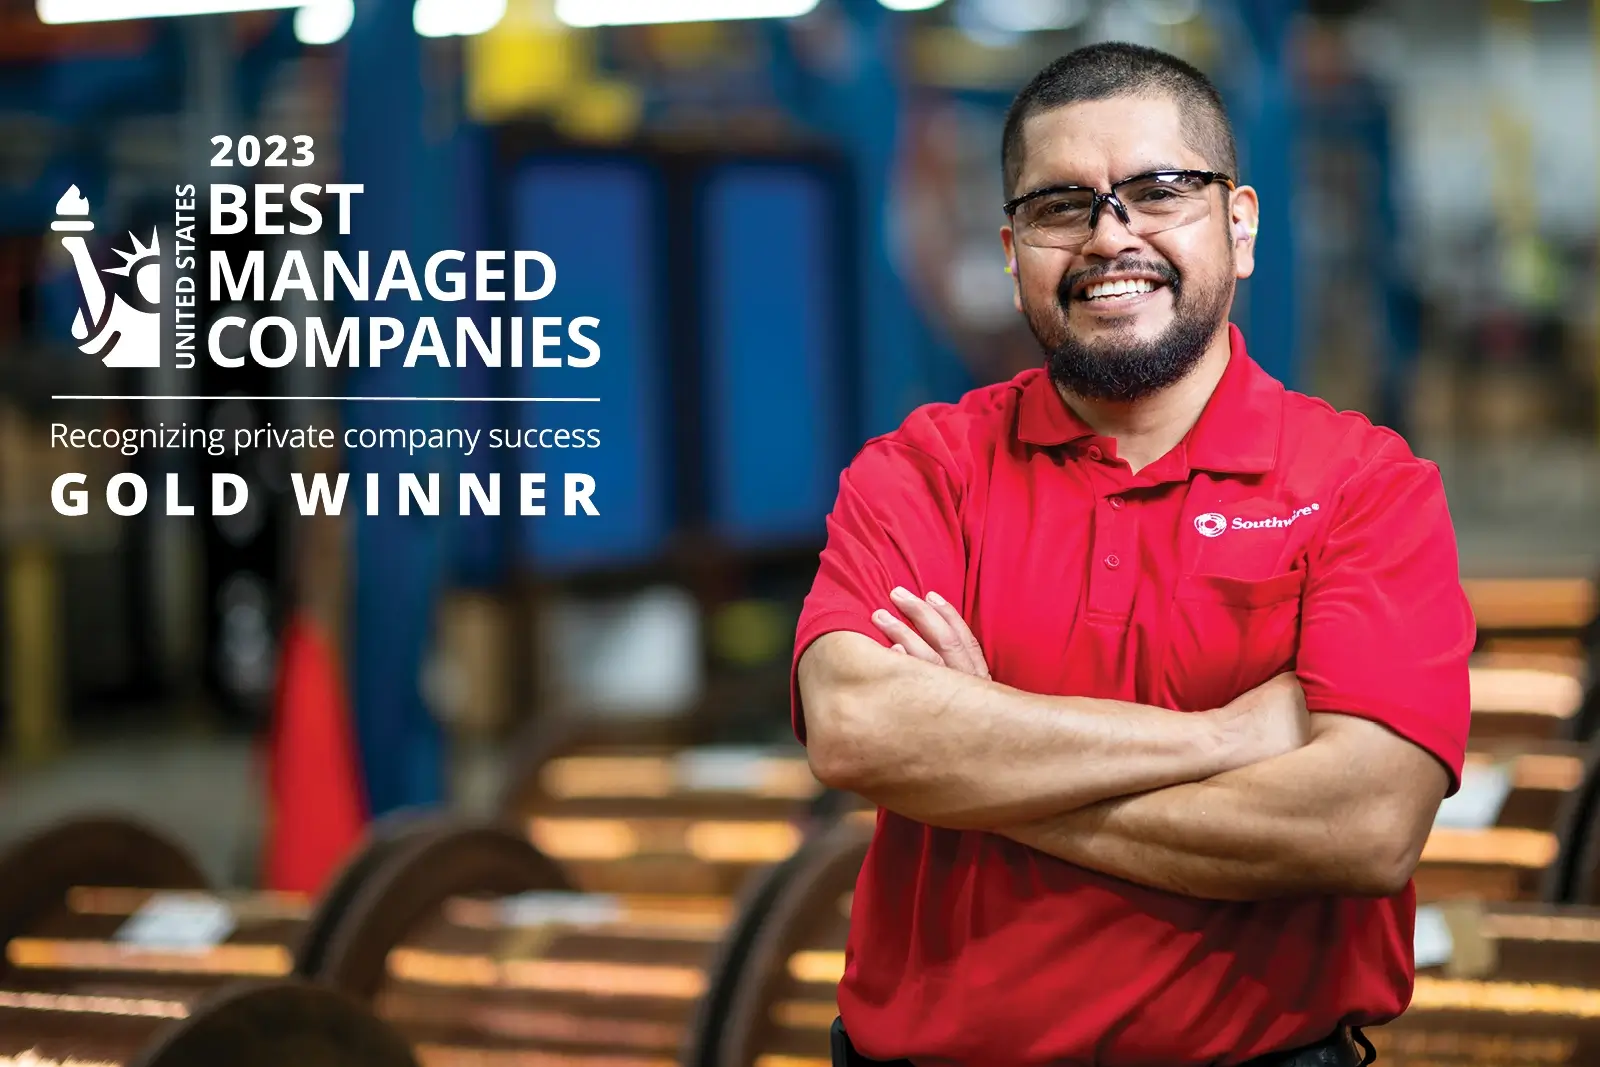 Southwire Recognized as a US Best Managed Company for the Fourth Year in a Row